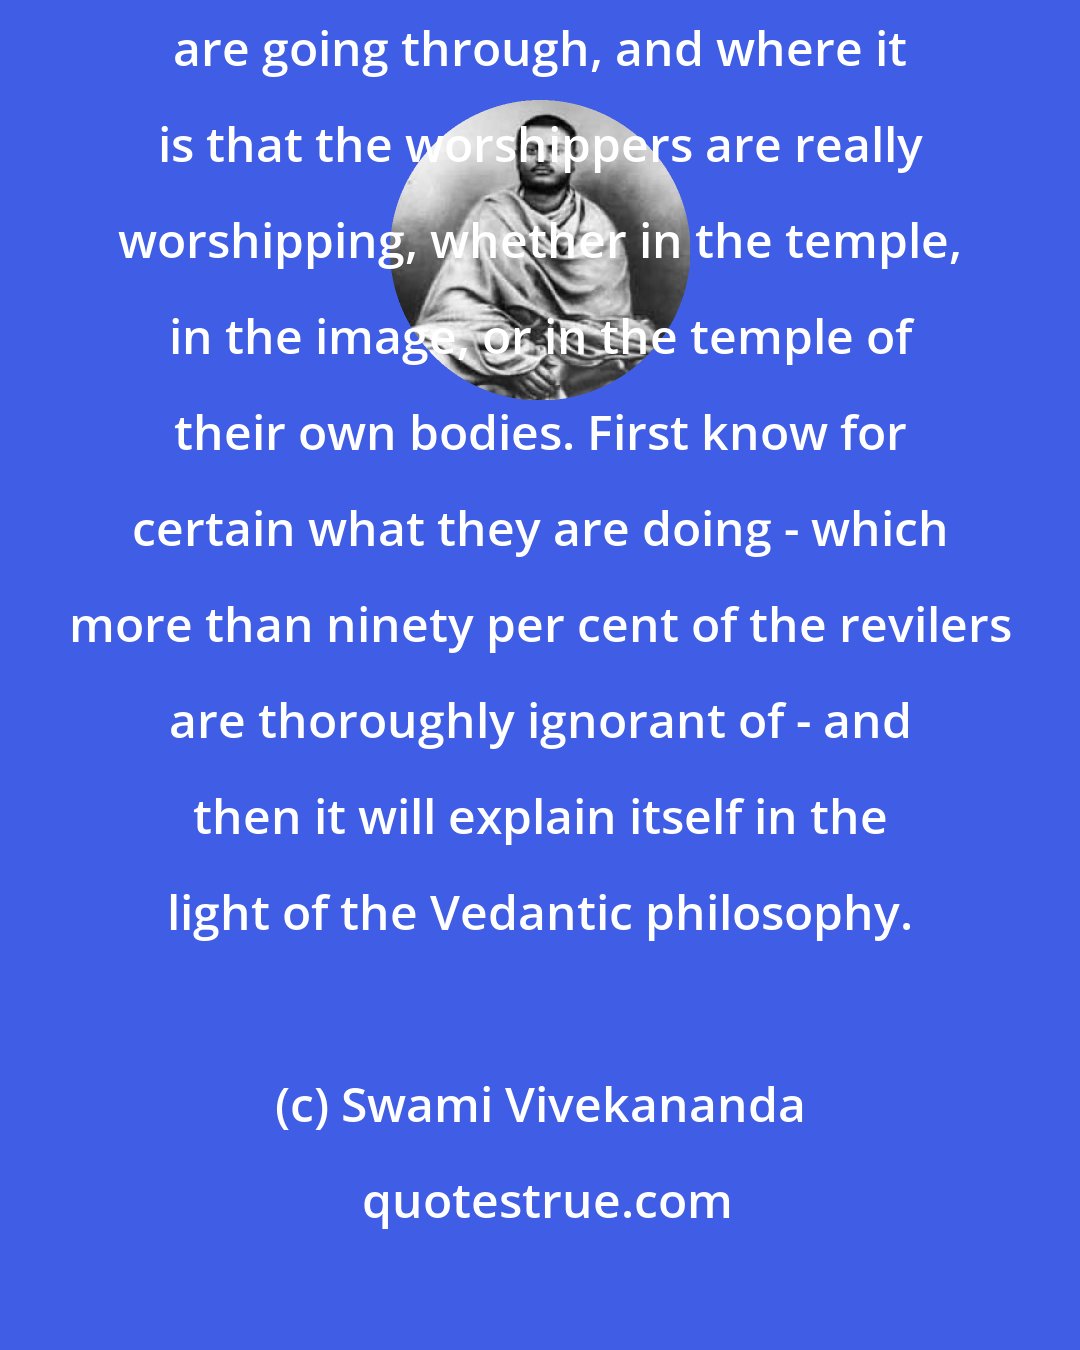 Swami Vivekananda: As to the so-called Hindu idolatry - first go and learn the forms they are going through, and where it is that the worshippers are really worshipping, whether in the temple, in the image, or in the temple of their own bodies. First know for certain what they are doing - which more than ninety per cent of the revilers are thoroughly ignorant of - and then it will explain itself in the light of the Vedantic philosophy.